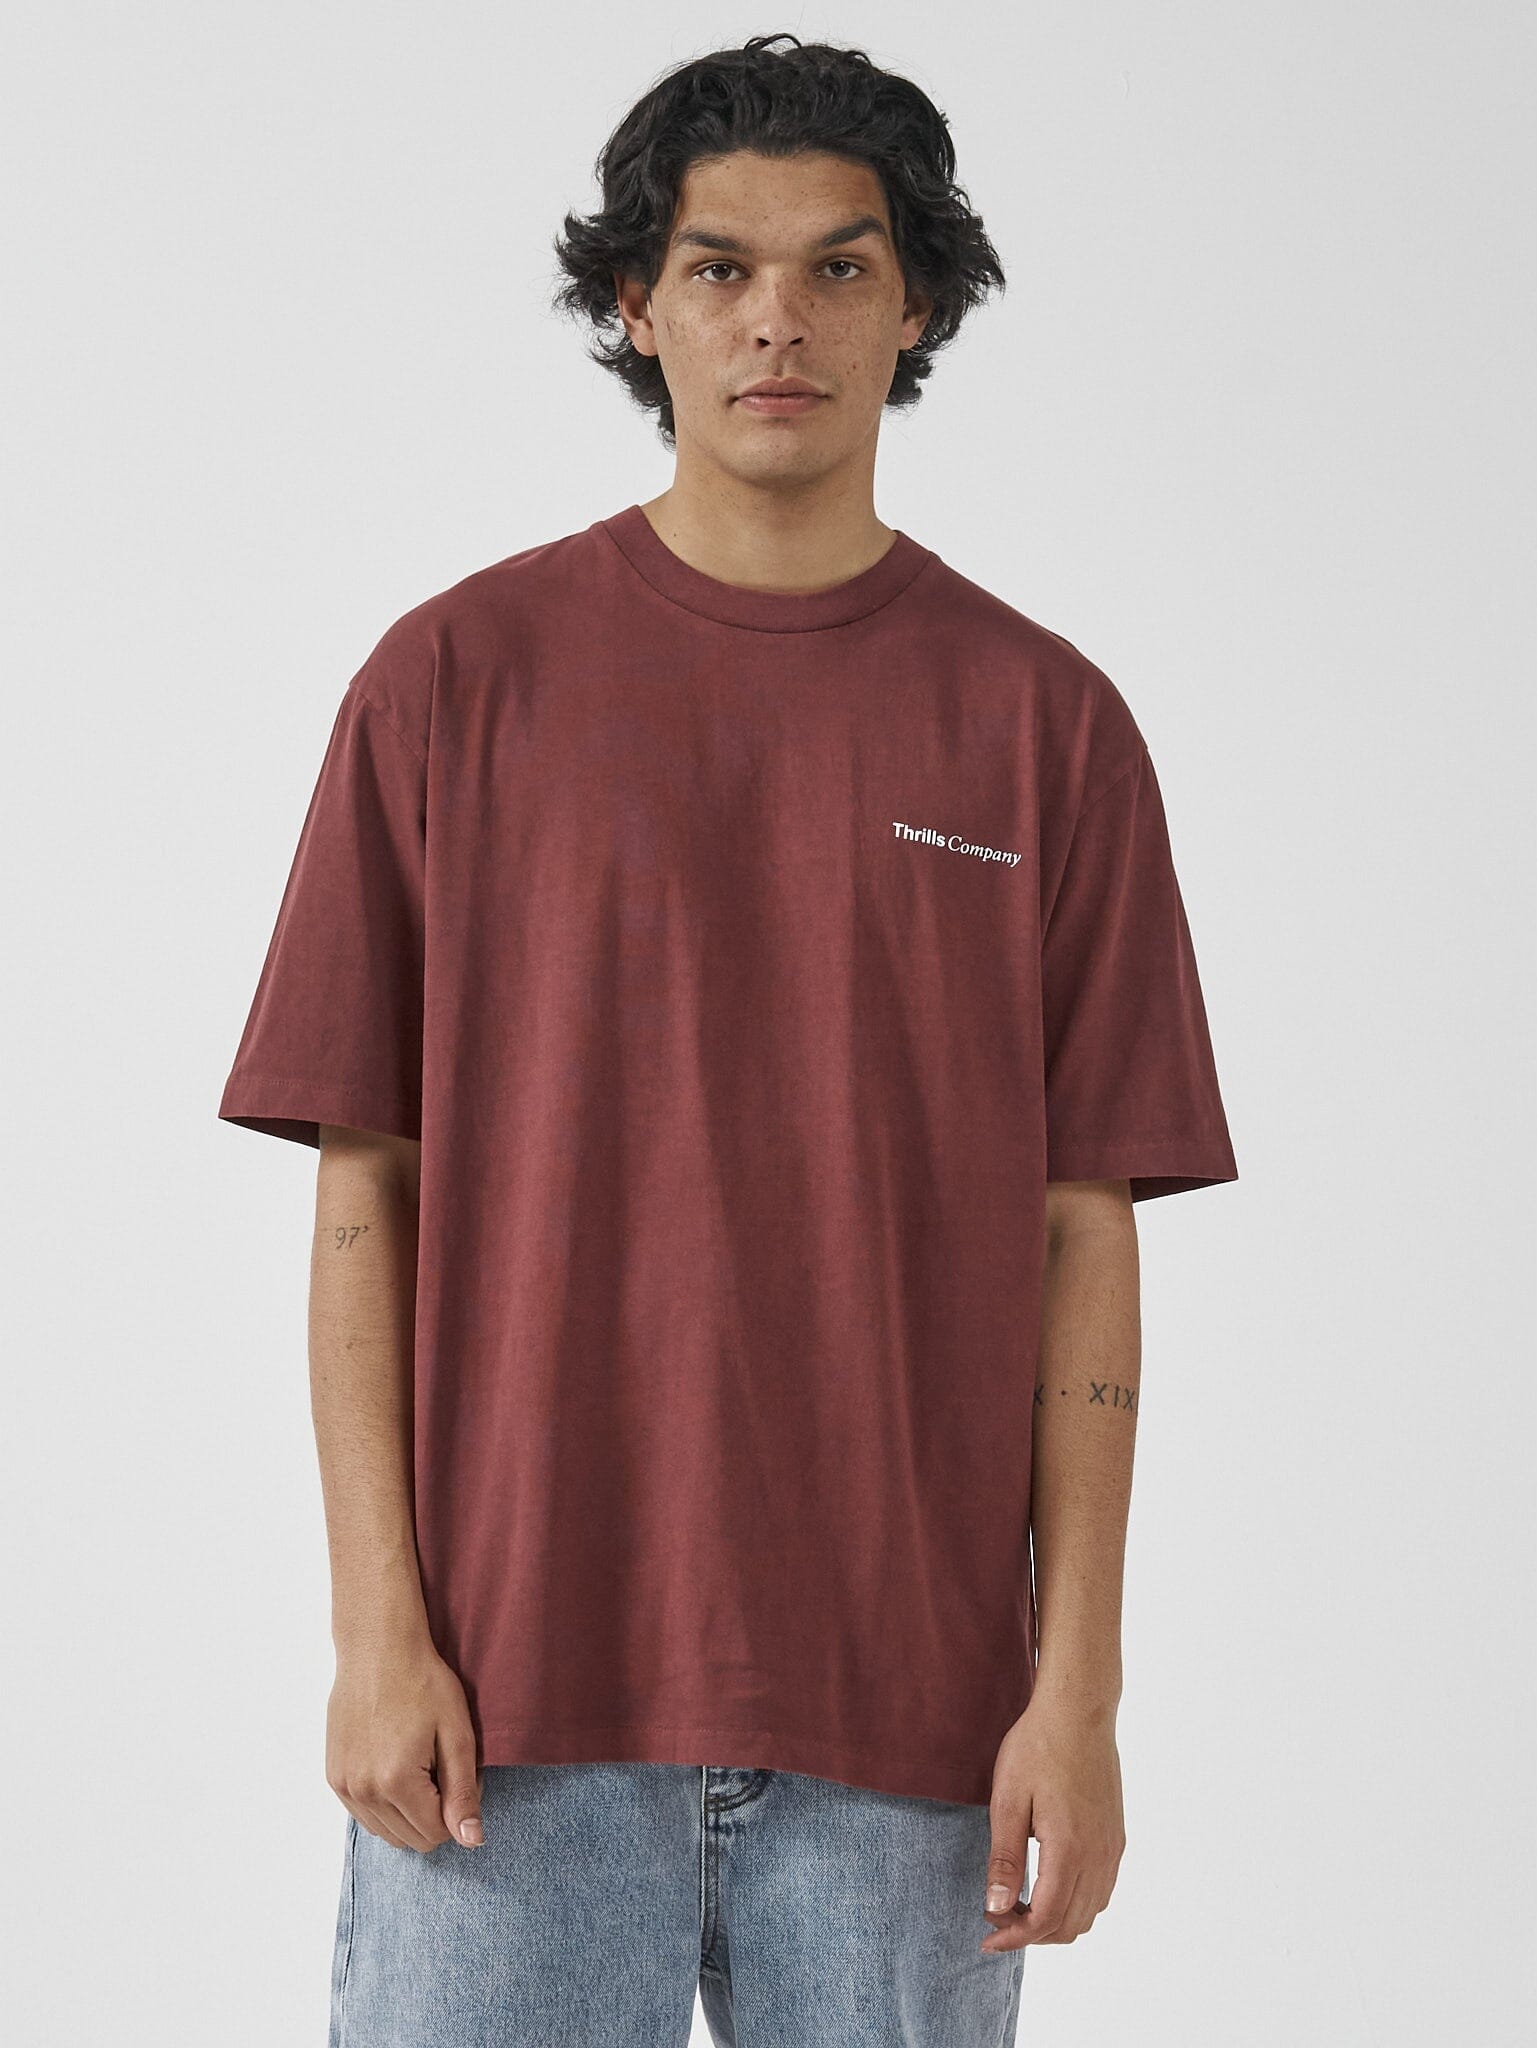 Normal Situation Oversize Fit Tee - Port